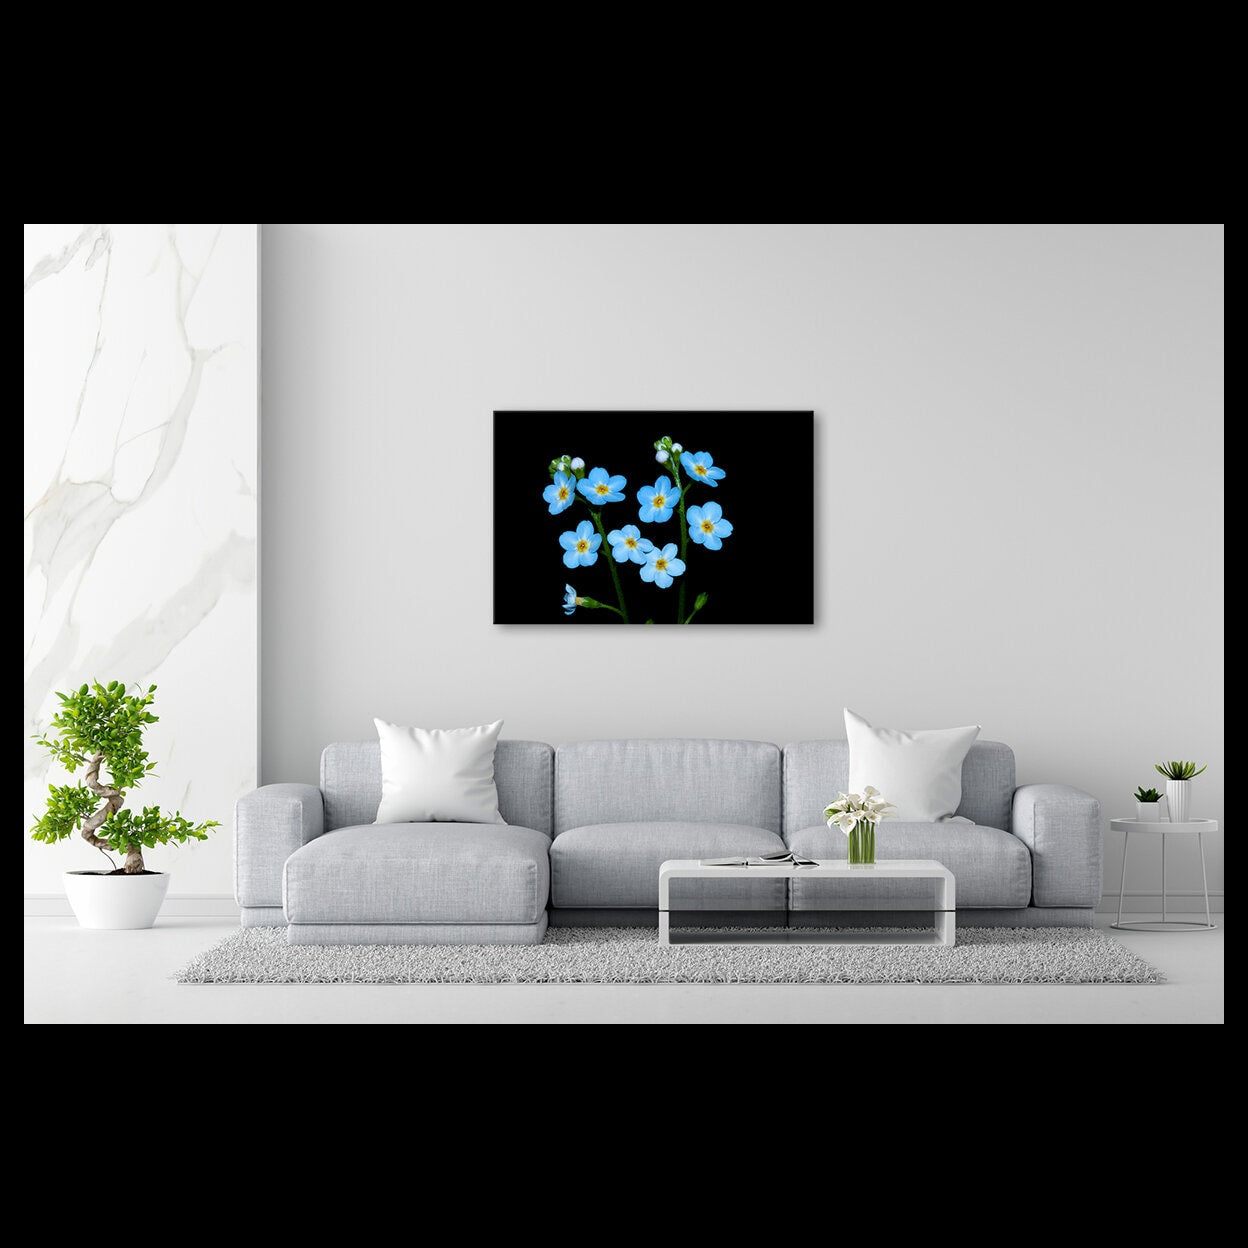 Forget me not best wall decoration for your home.